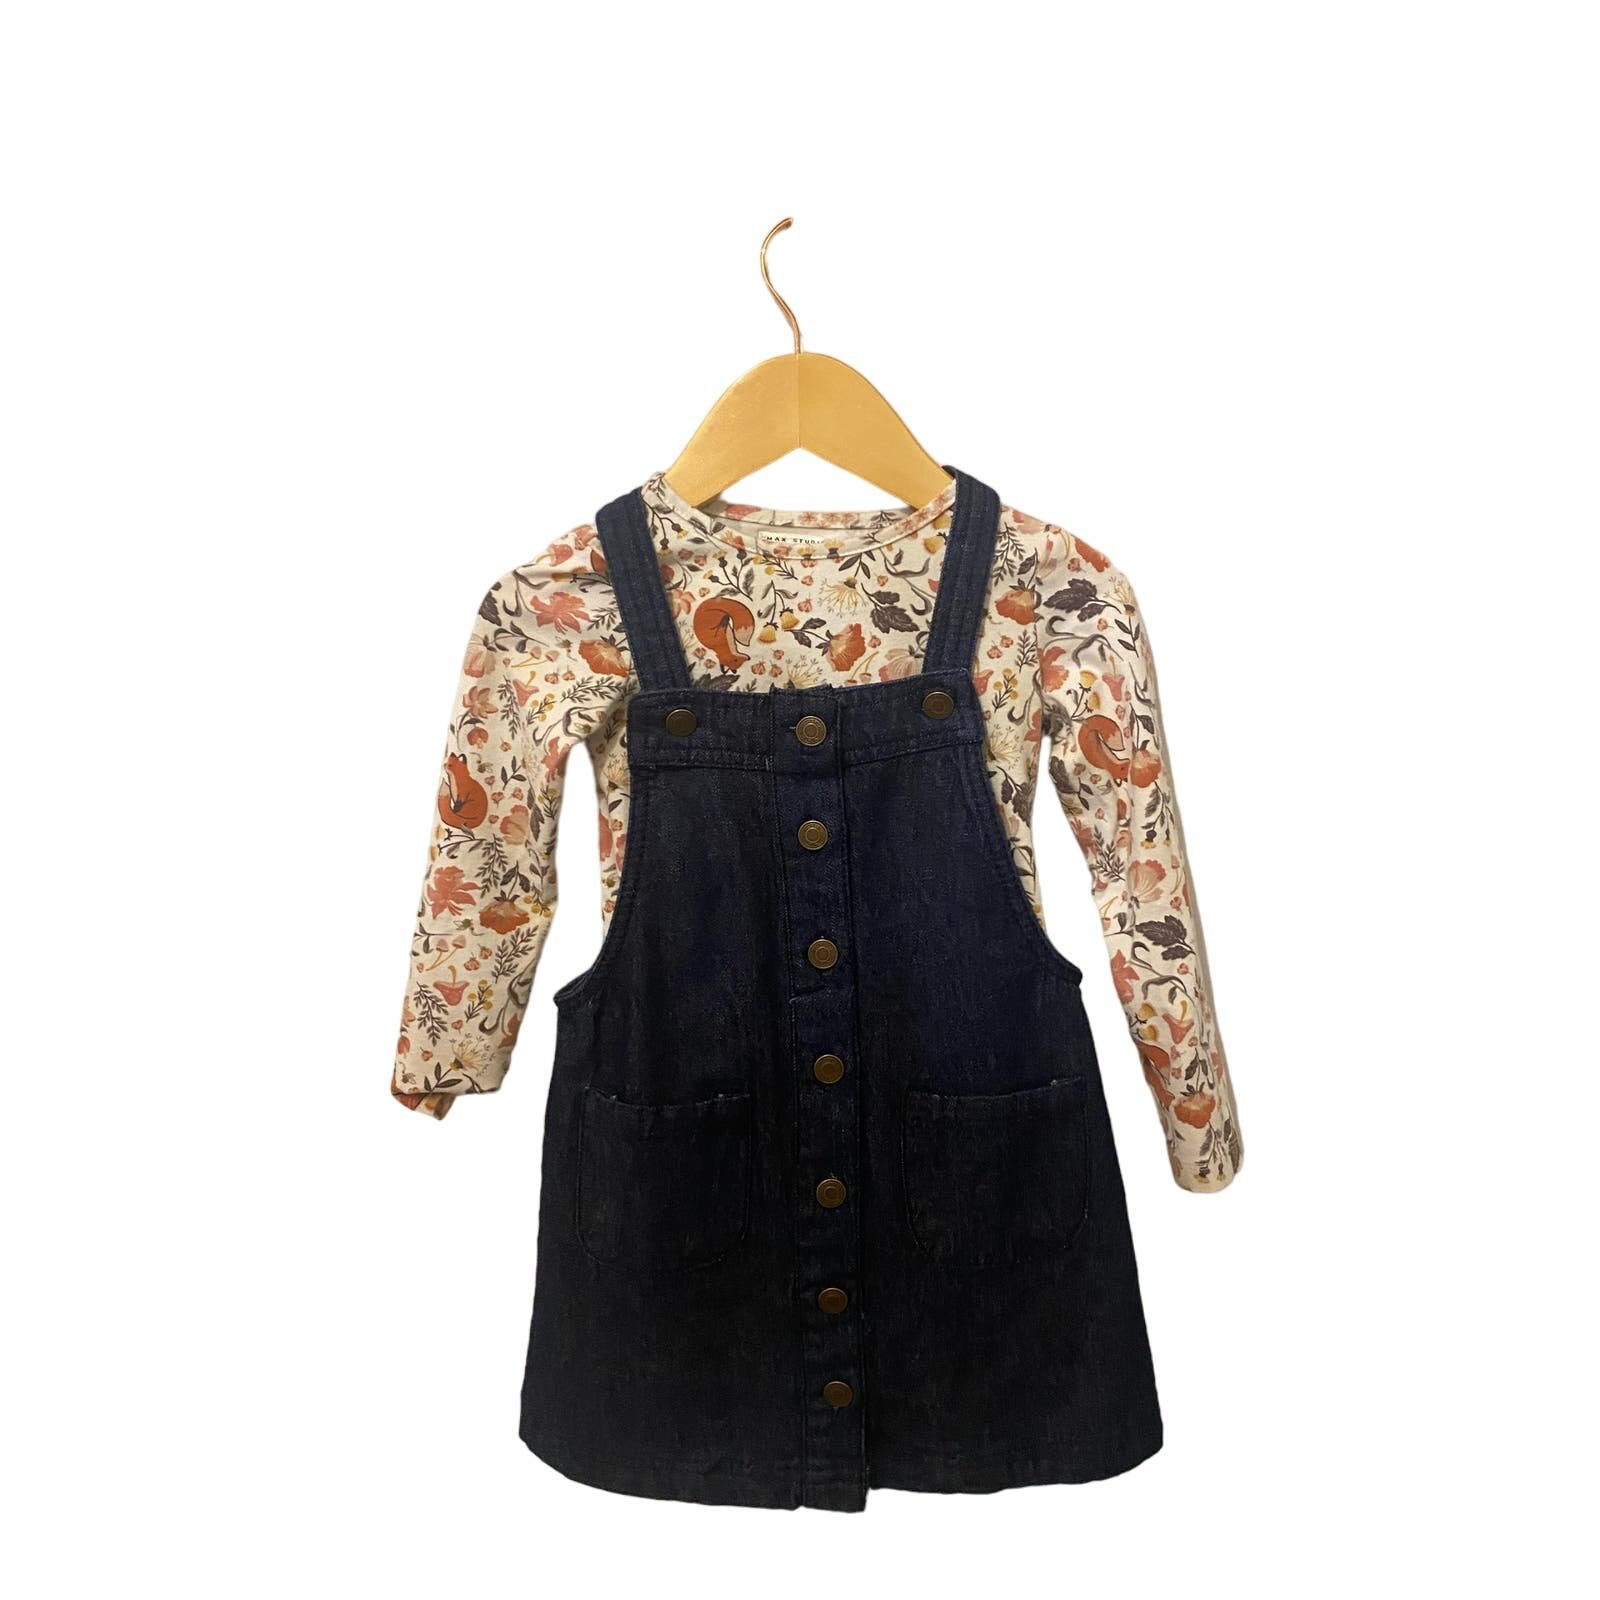 Max Studio Overall Dress & Shirt Outfit 2T KOKjnd9YL